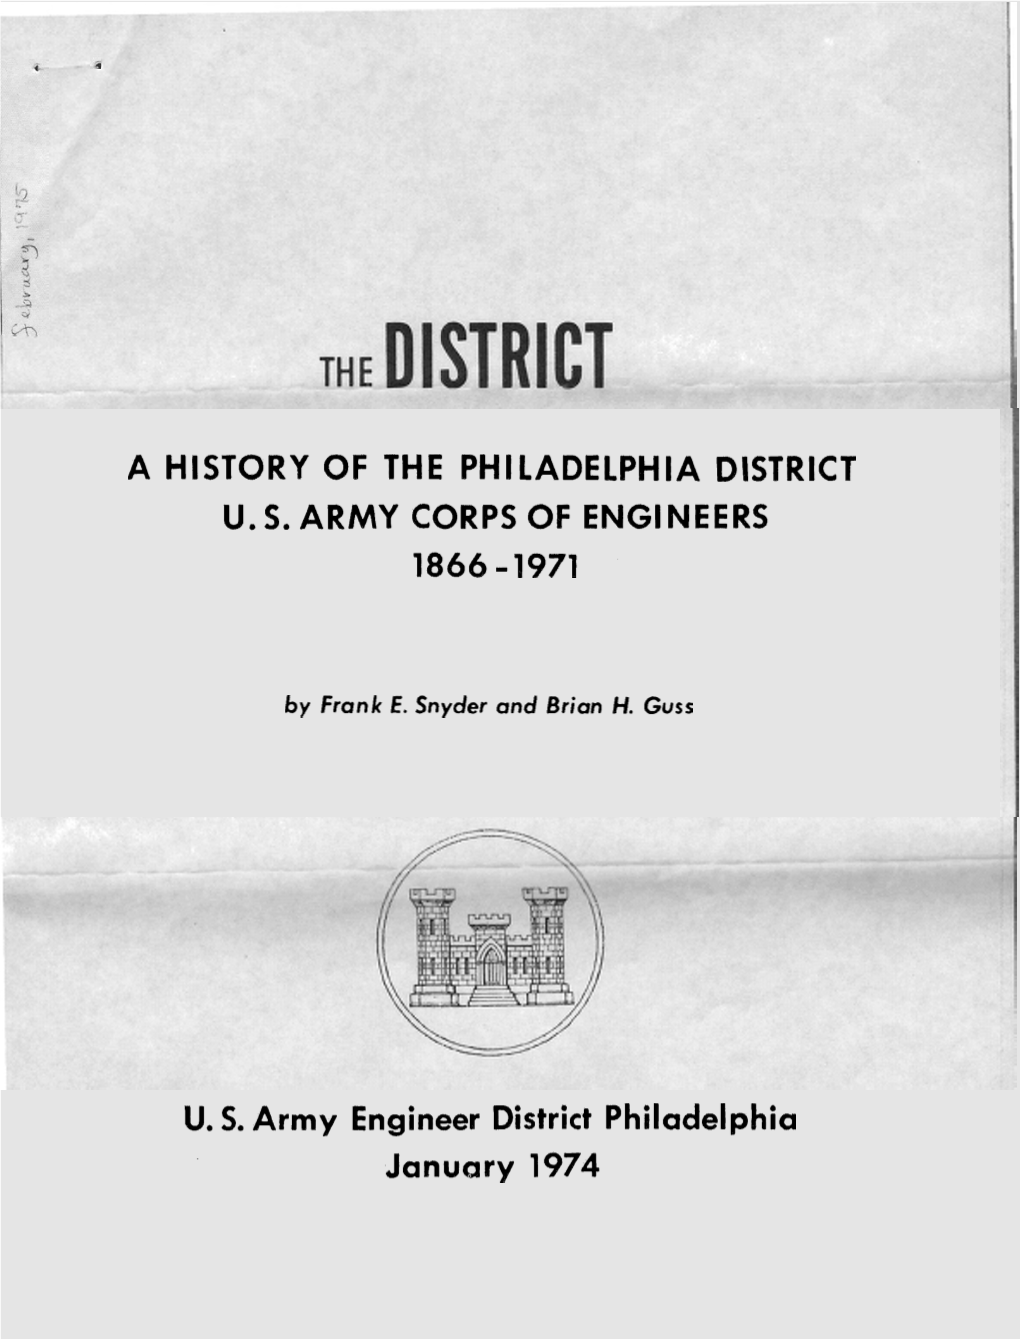 A History of the Philadelphia District Us Army Corps of Engineers 1866